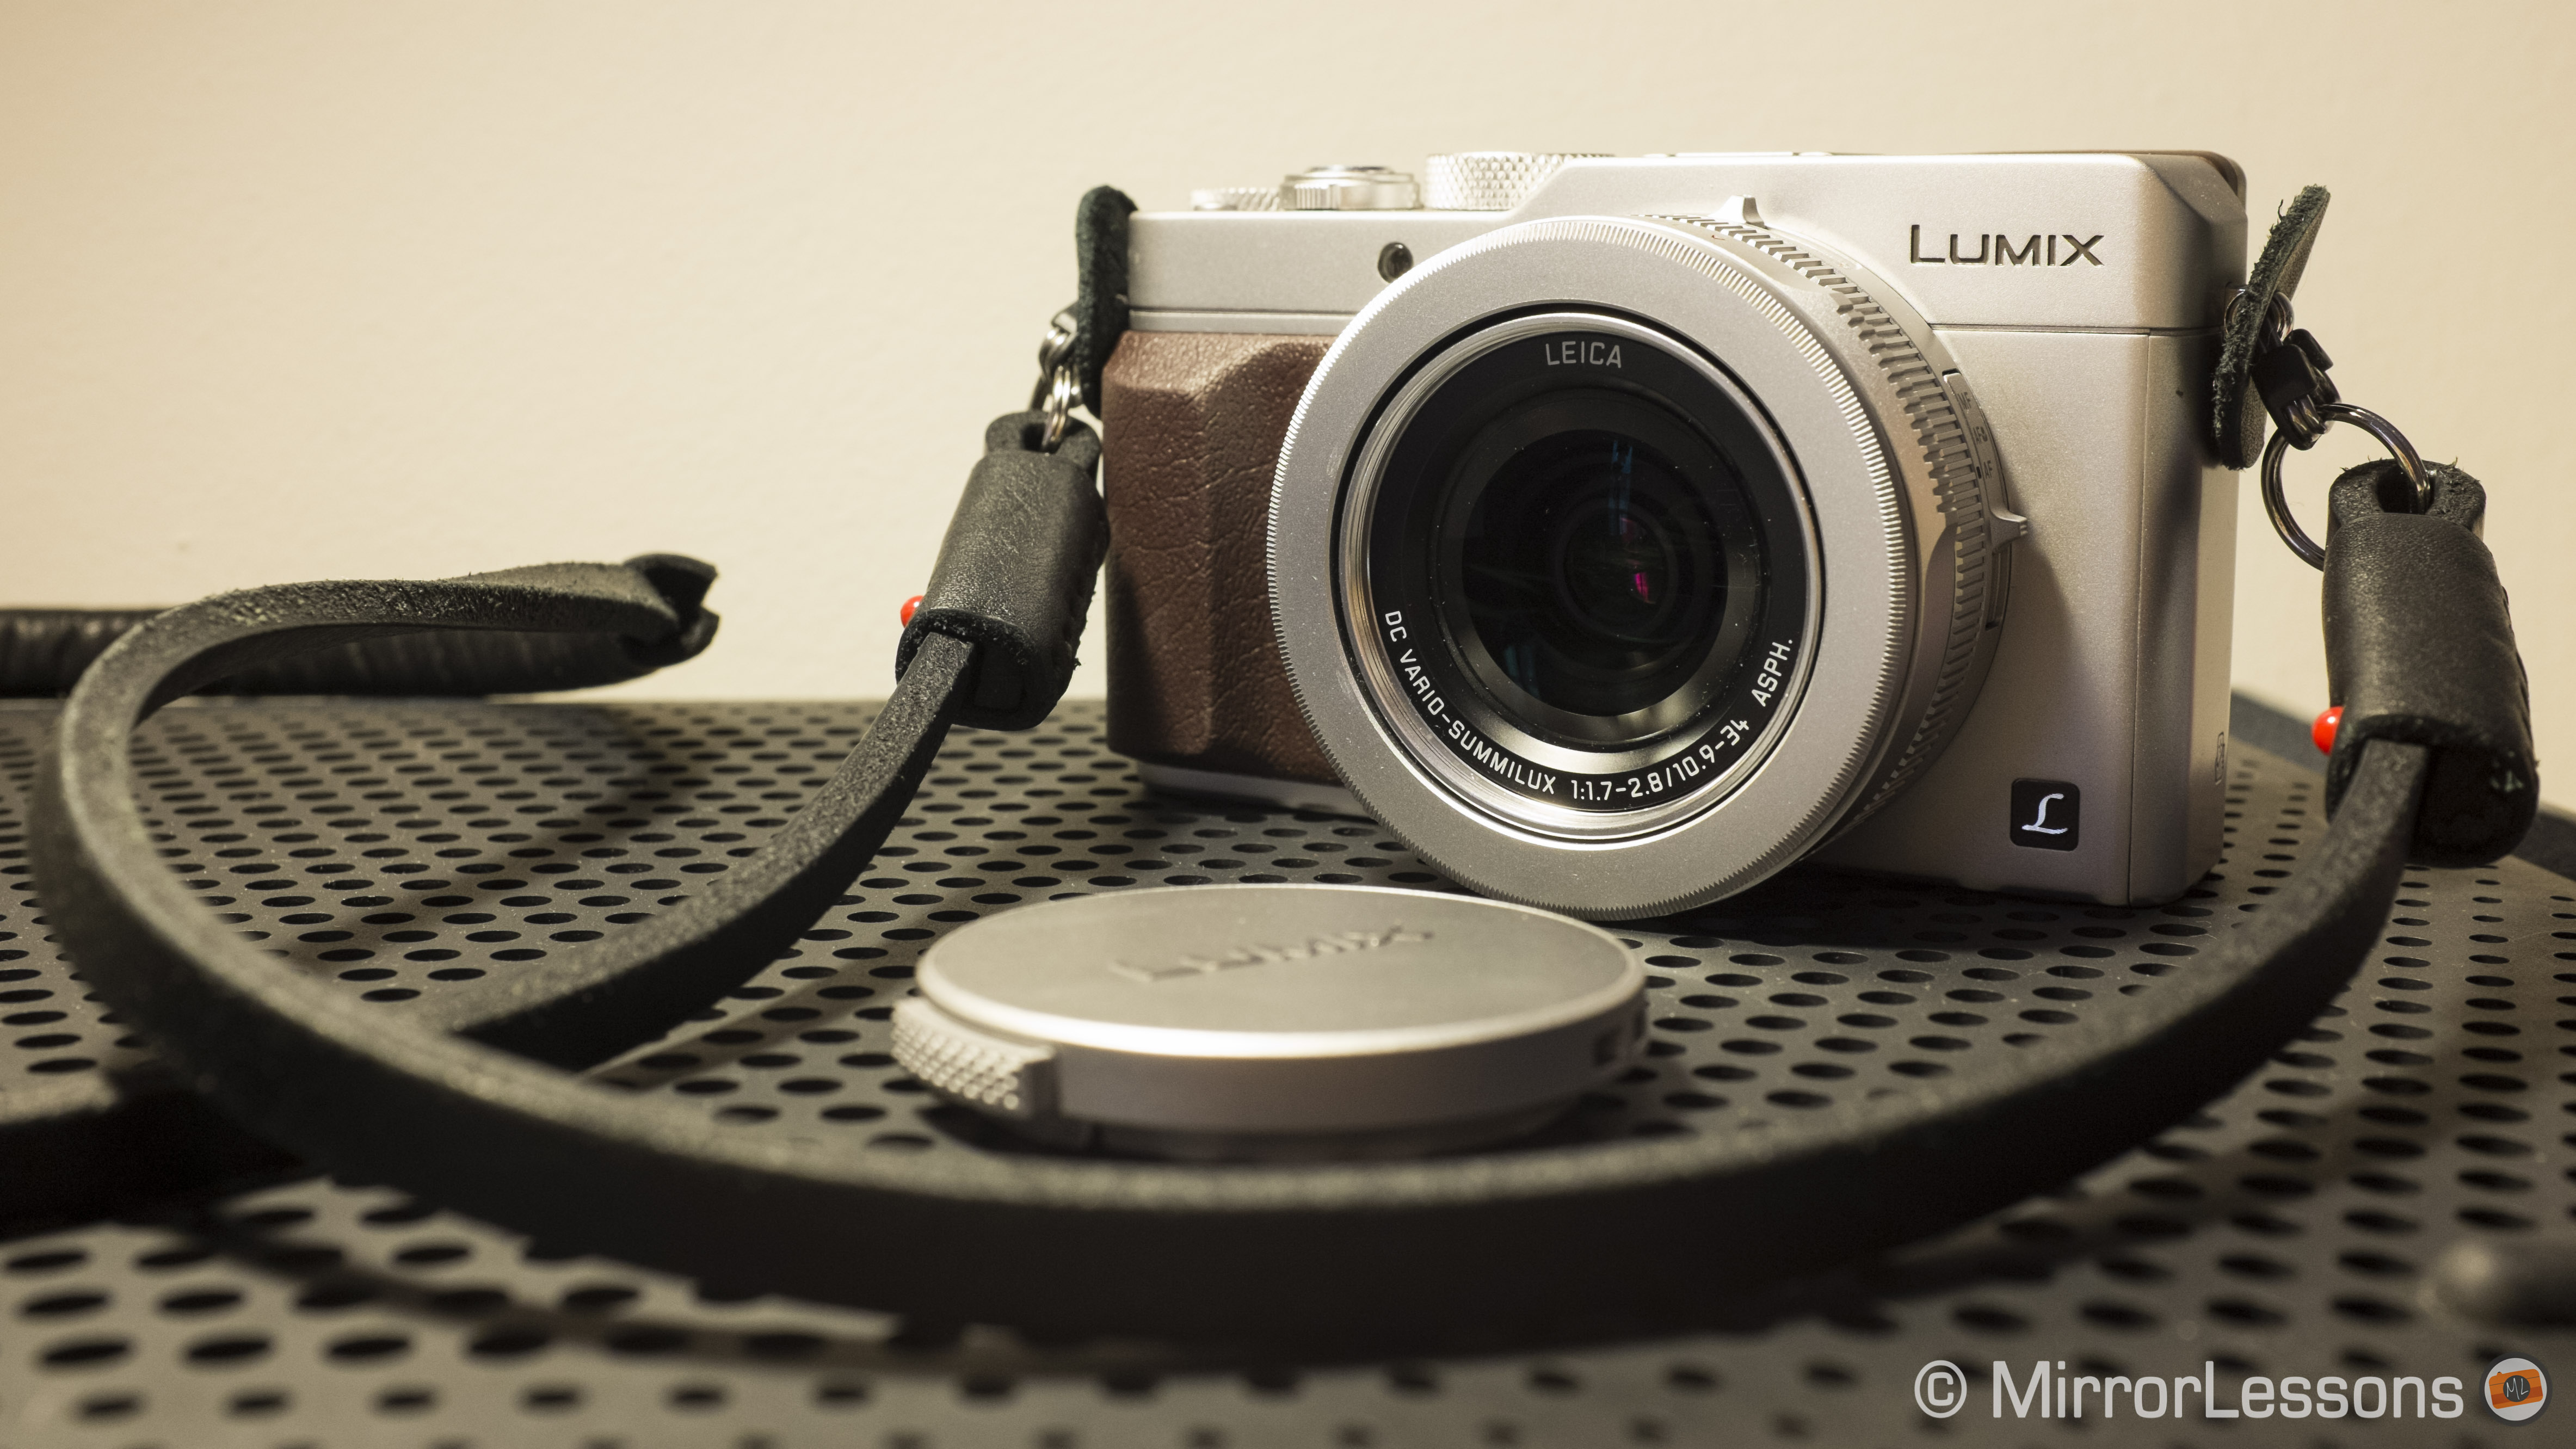 5 Useful Accessories for Your Brand New Panasonic Lumix LX100